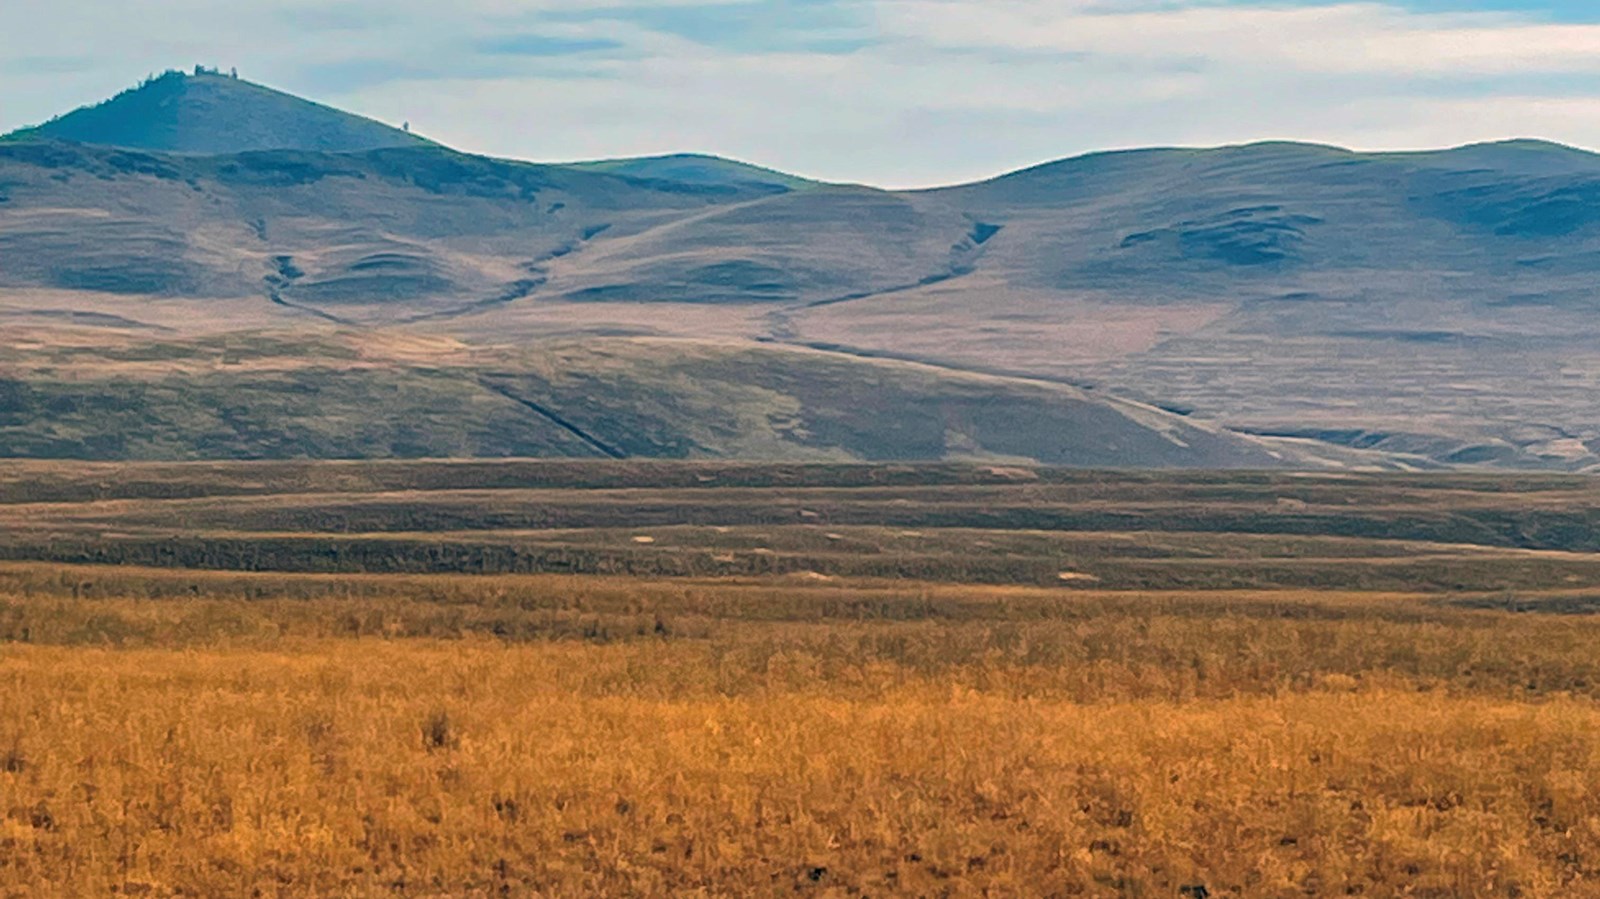 Rolling hills covered in brown grass with mountains in the background